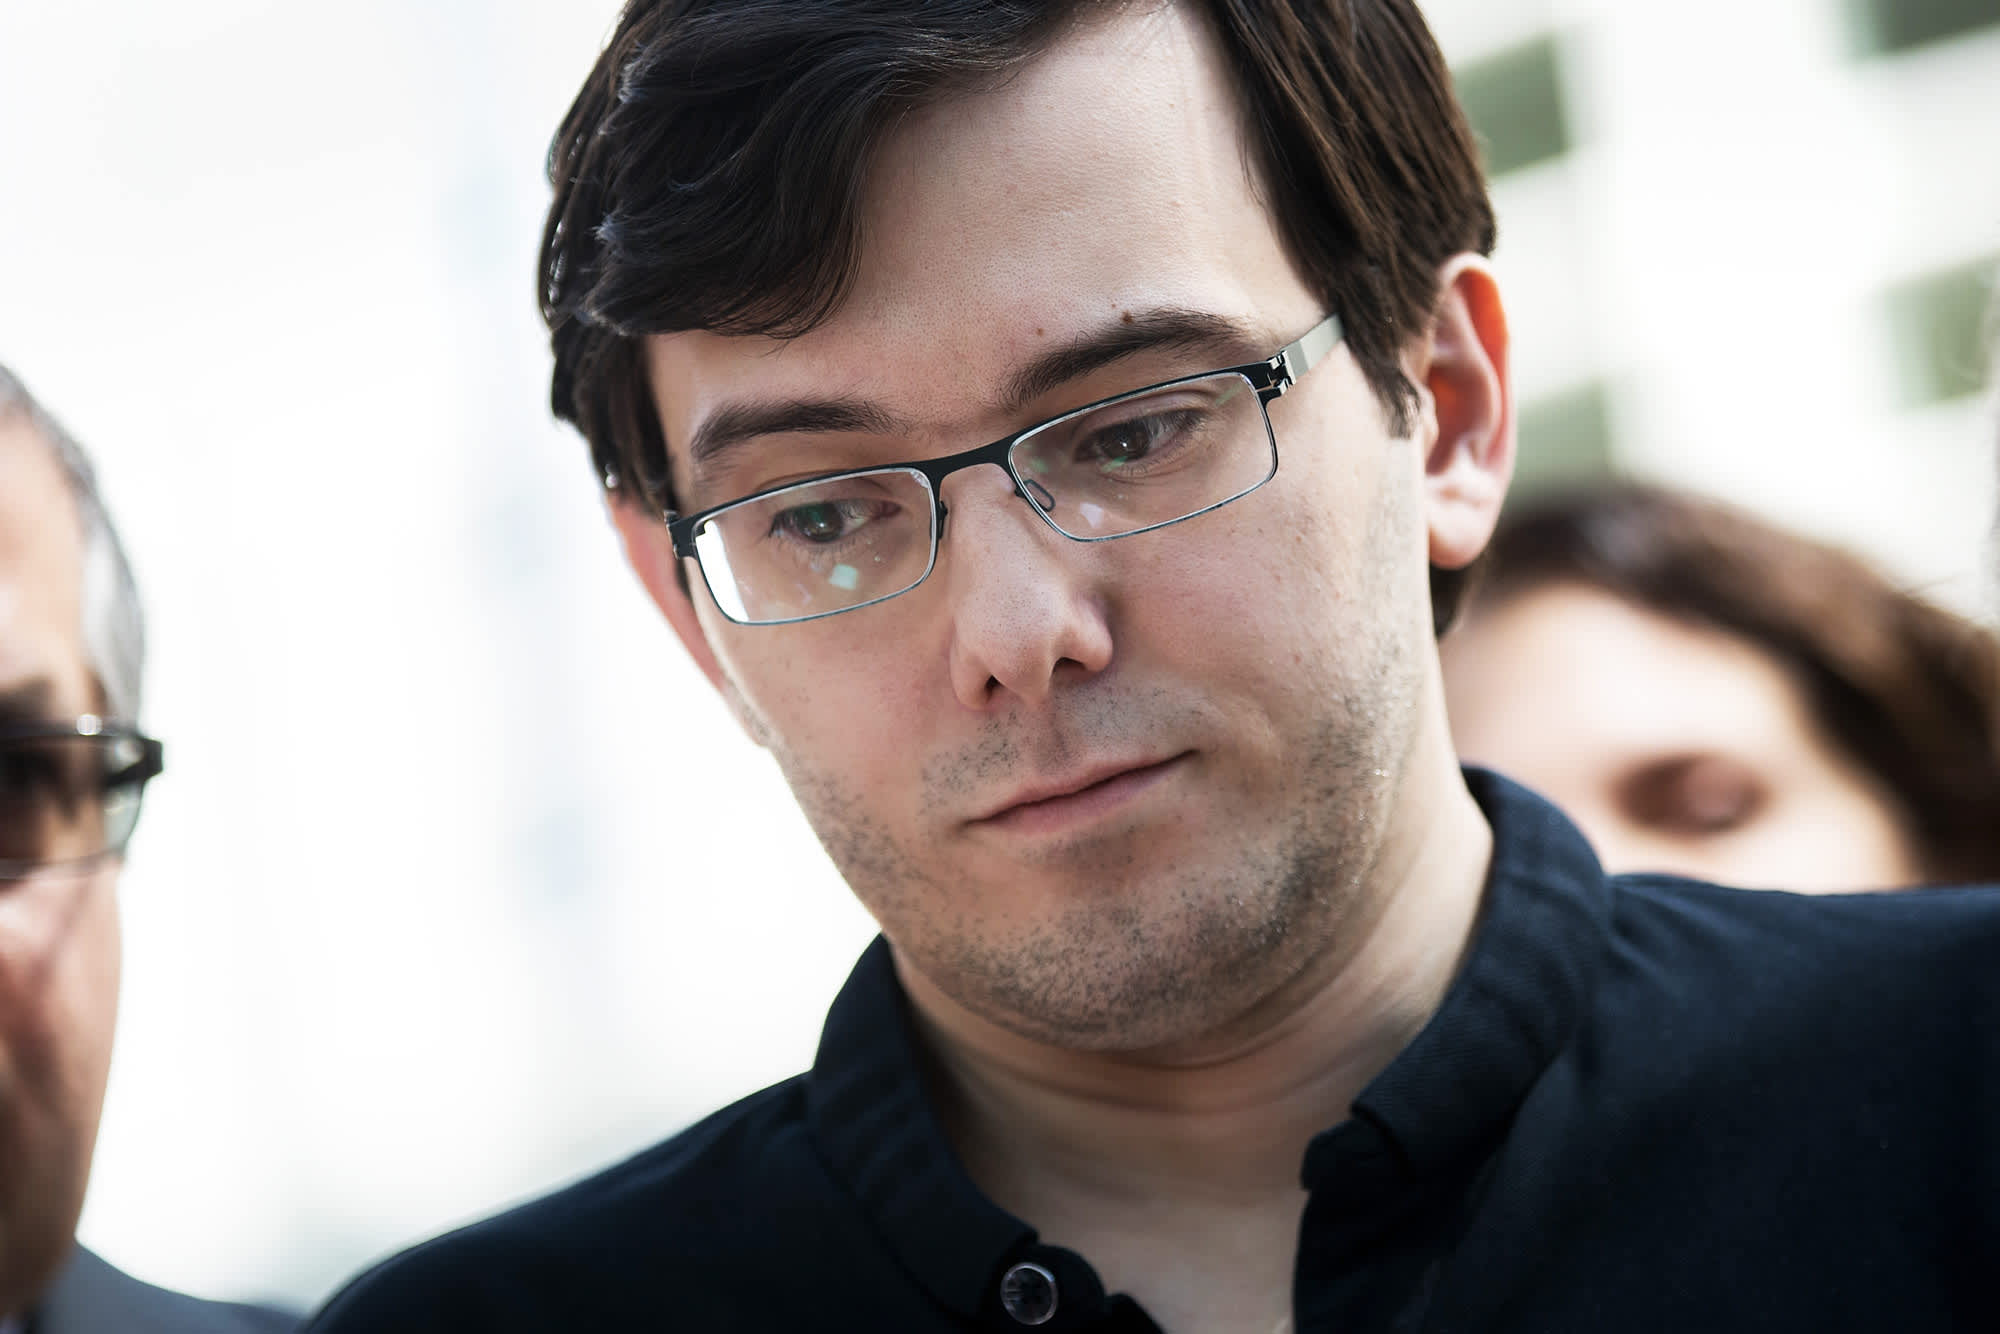 'Pharma bro' Martin Shkreli sentenced to 7 years in prison — says, 'This is my fault'